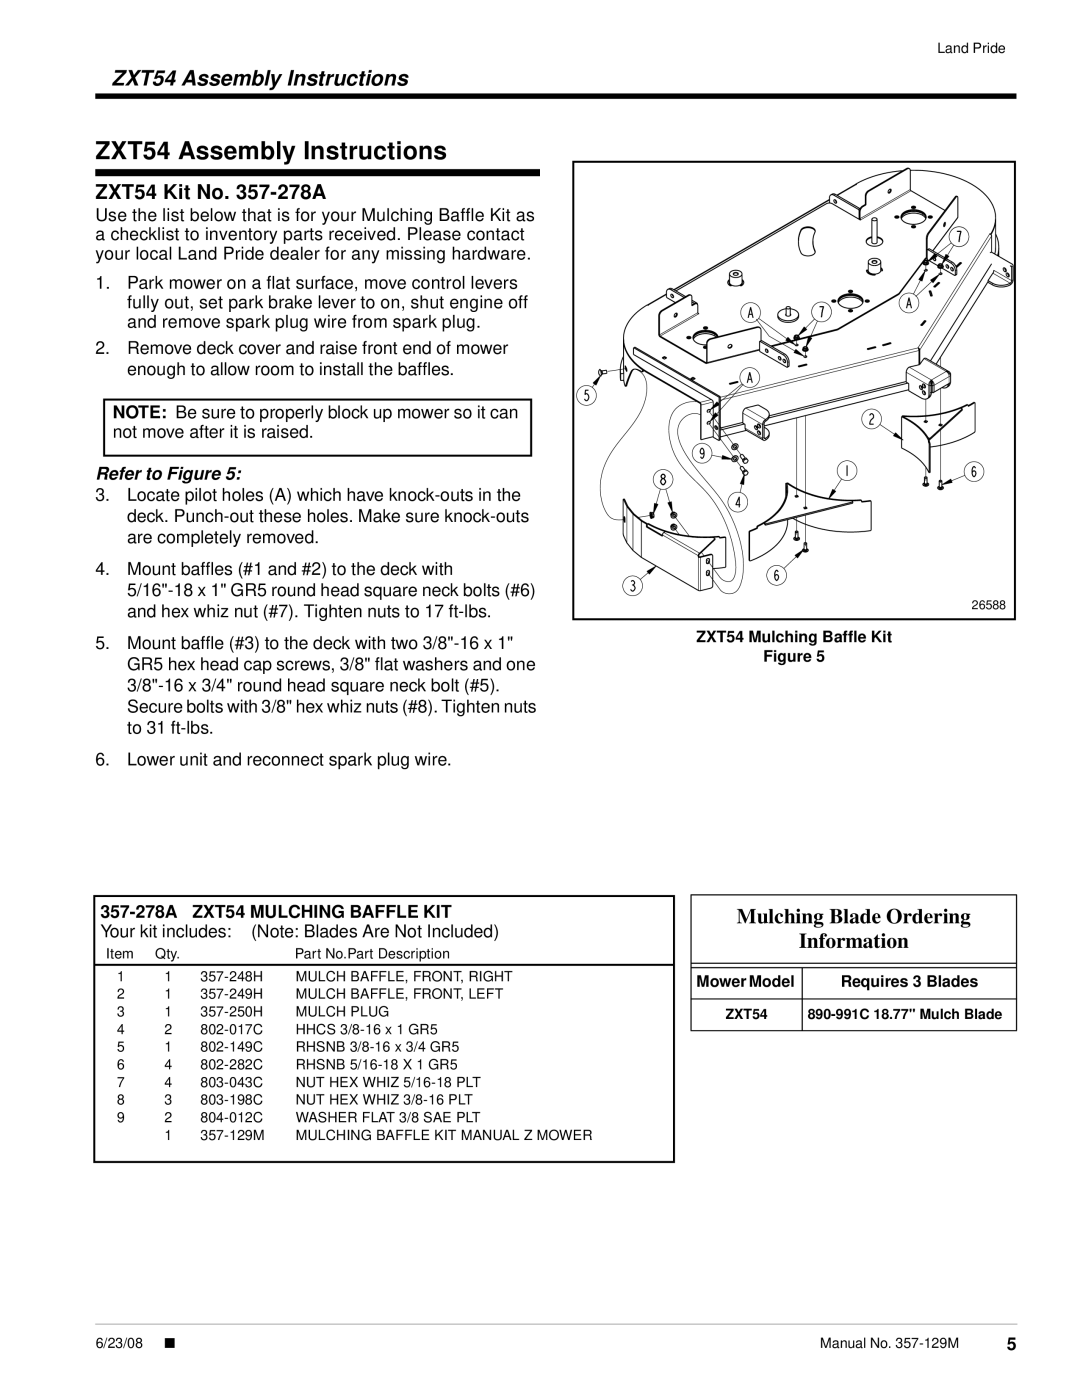 Land Pride 357-131A ZT72, ZT60 ZXT54 Assembly Instructions, ZXT54 Kit No. 357-278A, Mulching Blade Ordering Information 